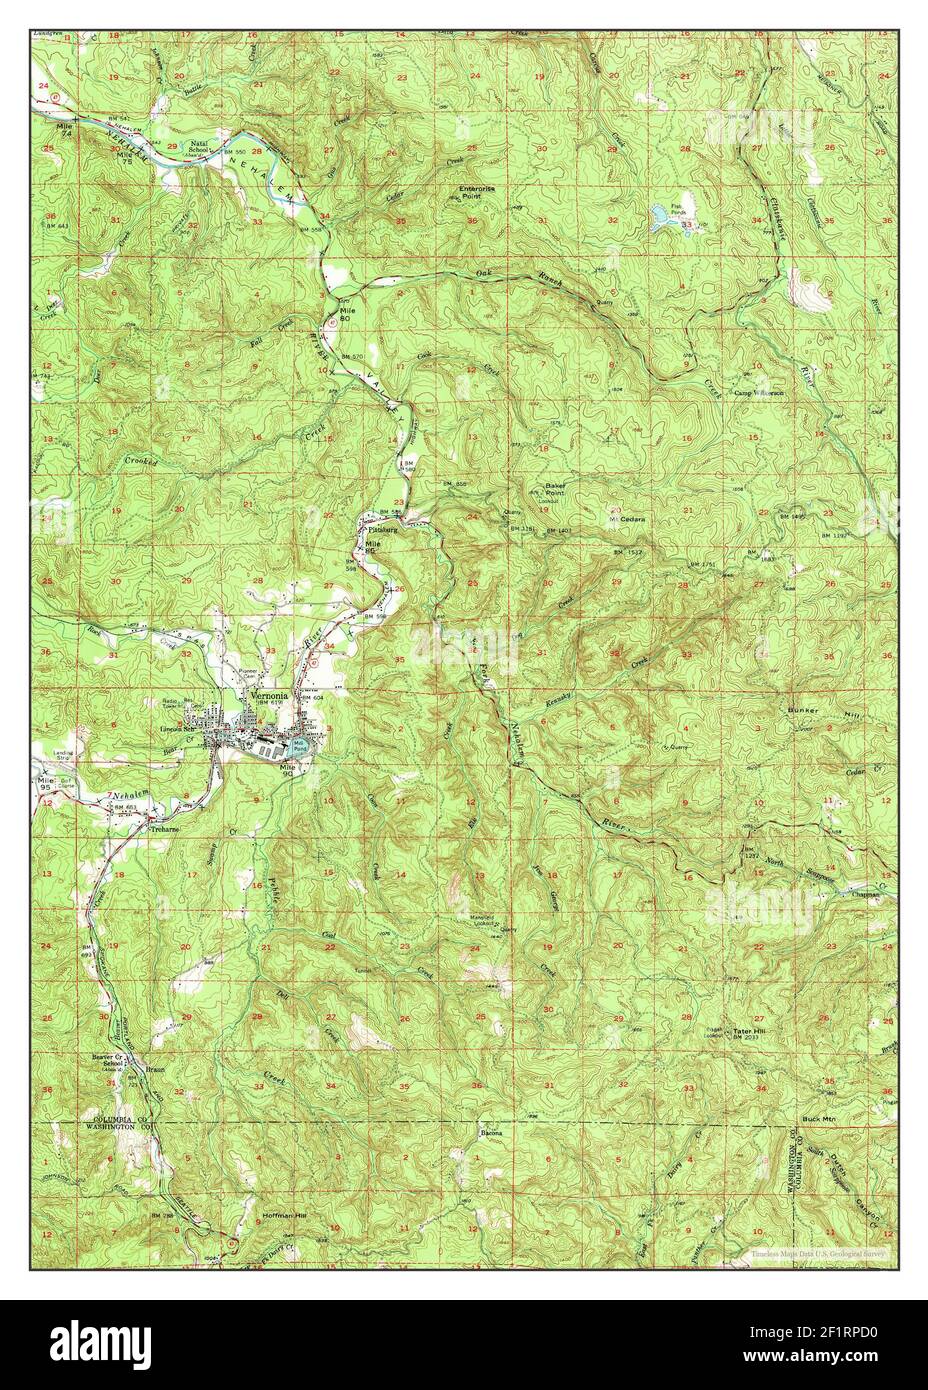 Vernonia, Oregon, map 1955, 1:62500, United States of America by Timeless Maps, data U.S. Geological Survey Stock Photo